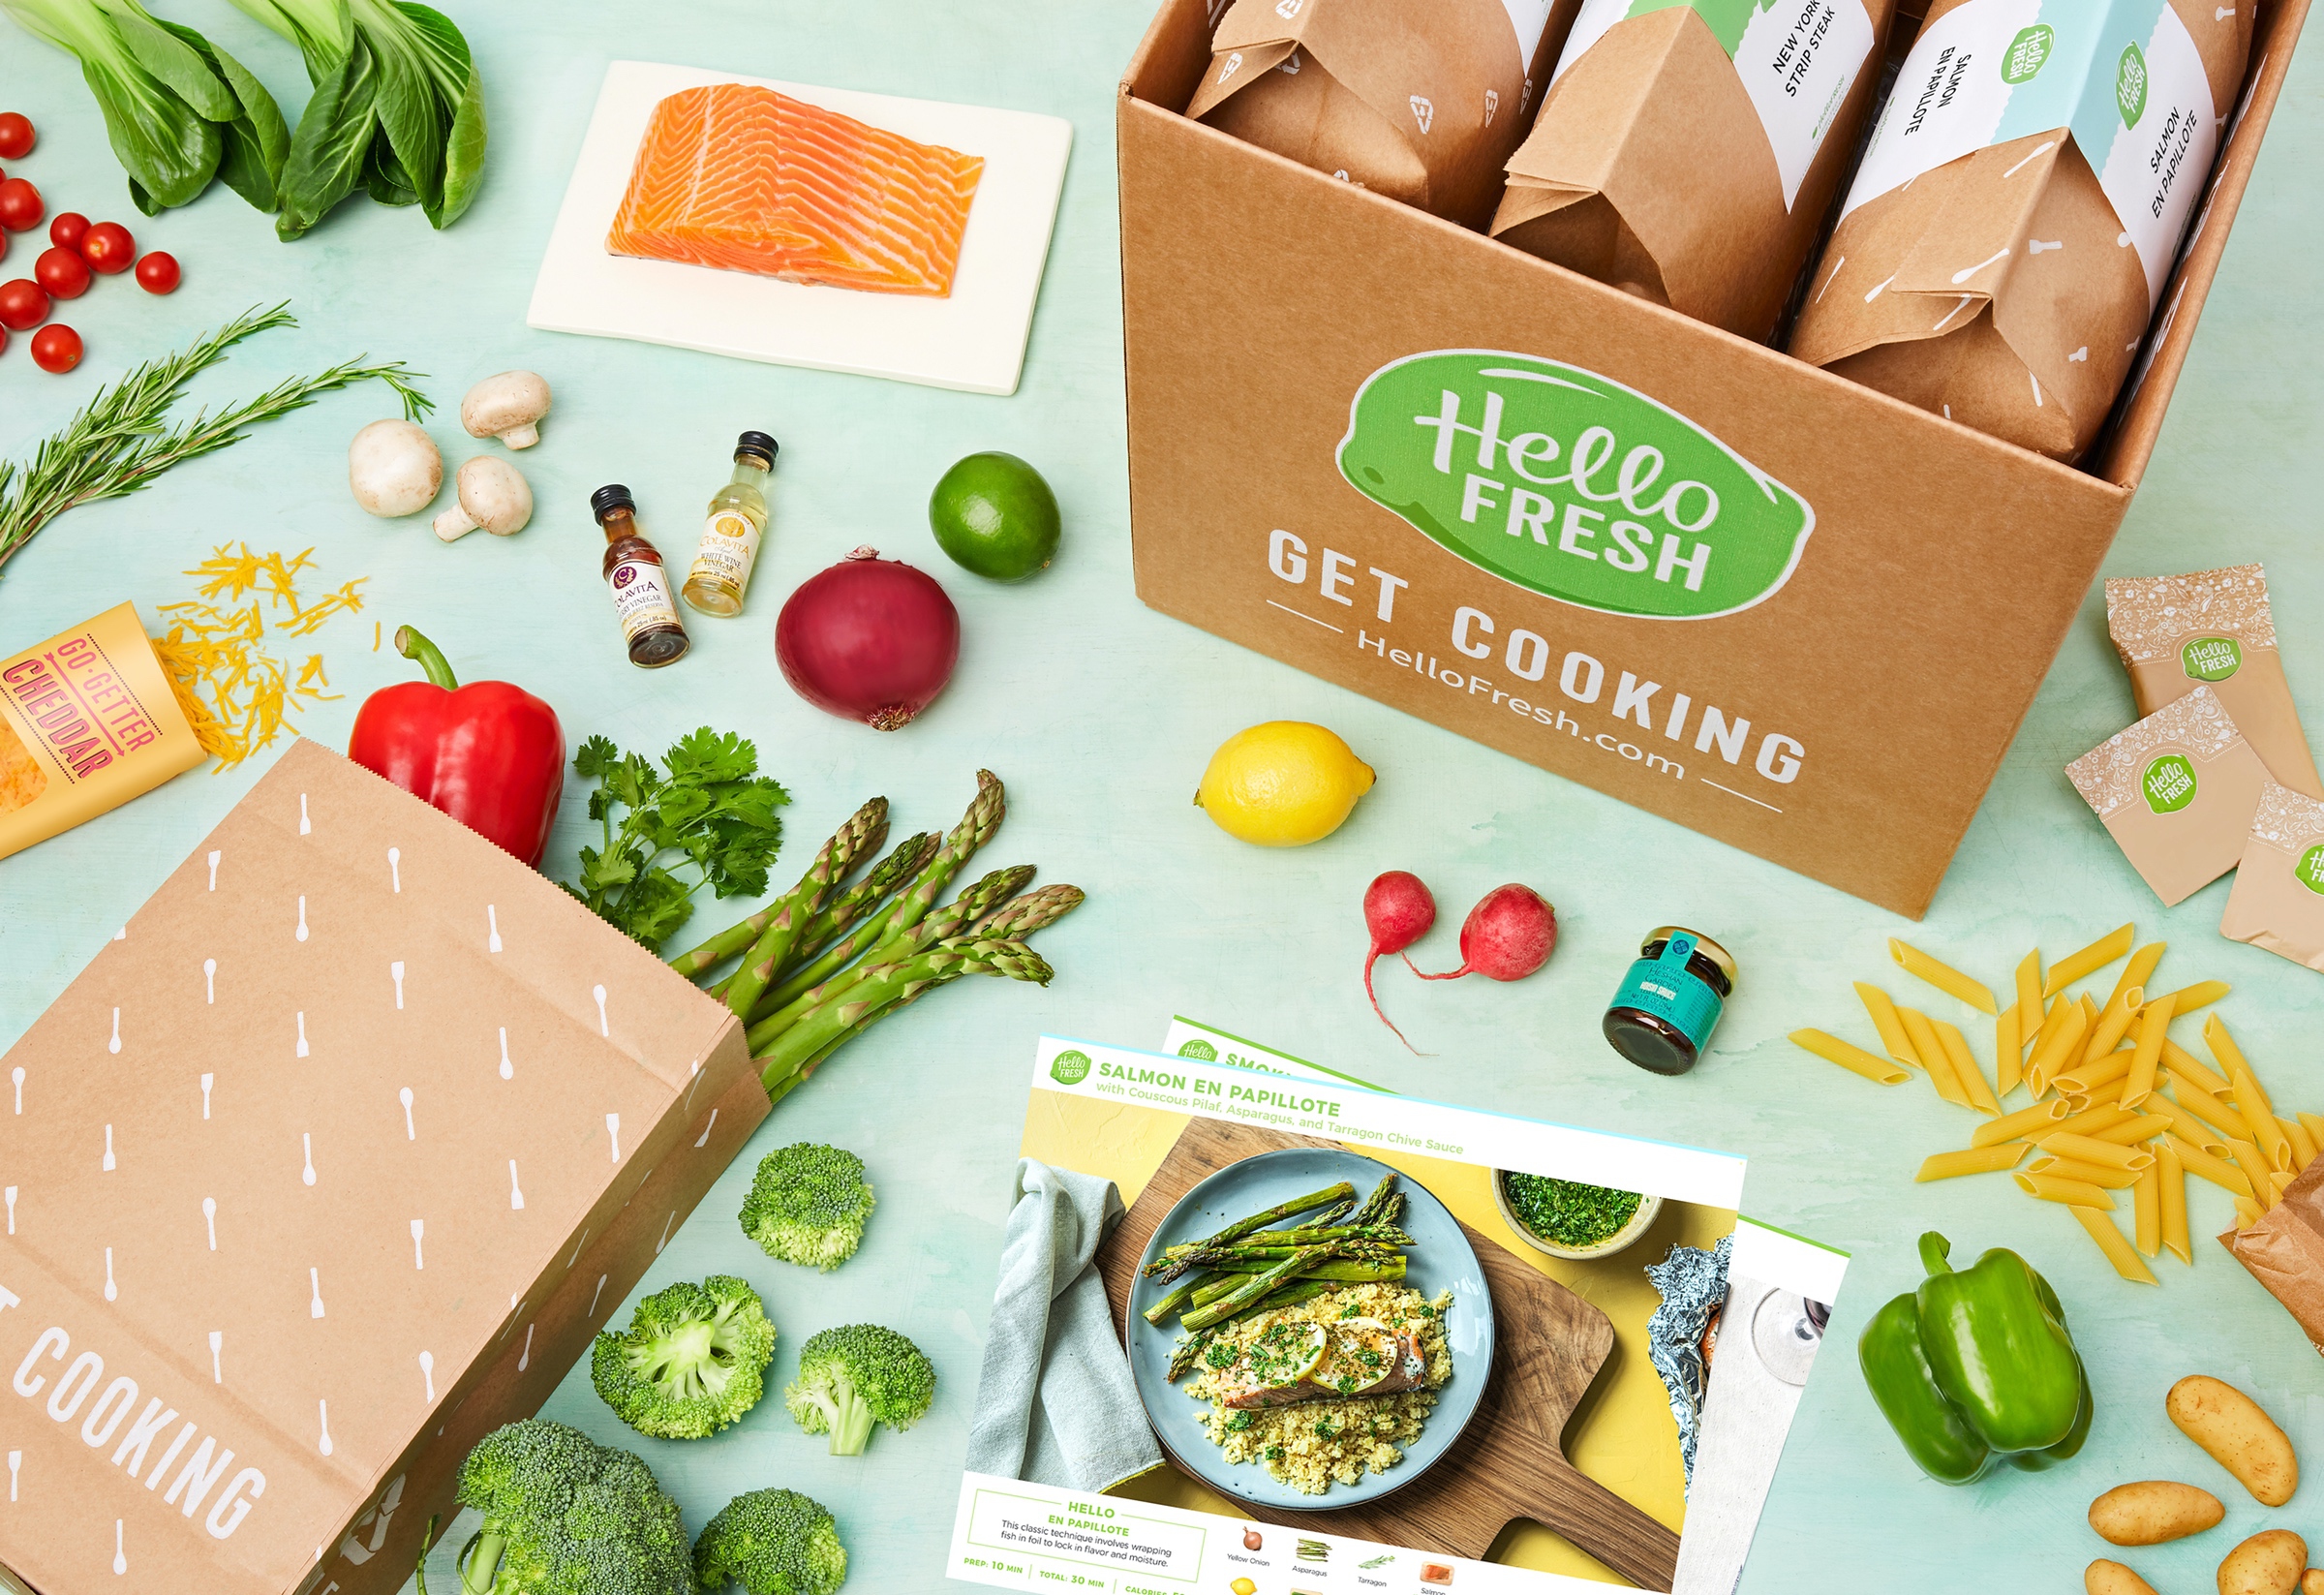 HelloFresh: Save on Your First Box with 16 Free Meals - wide 9